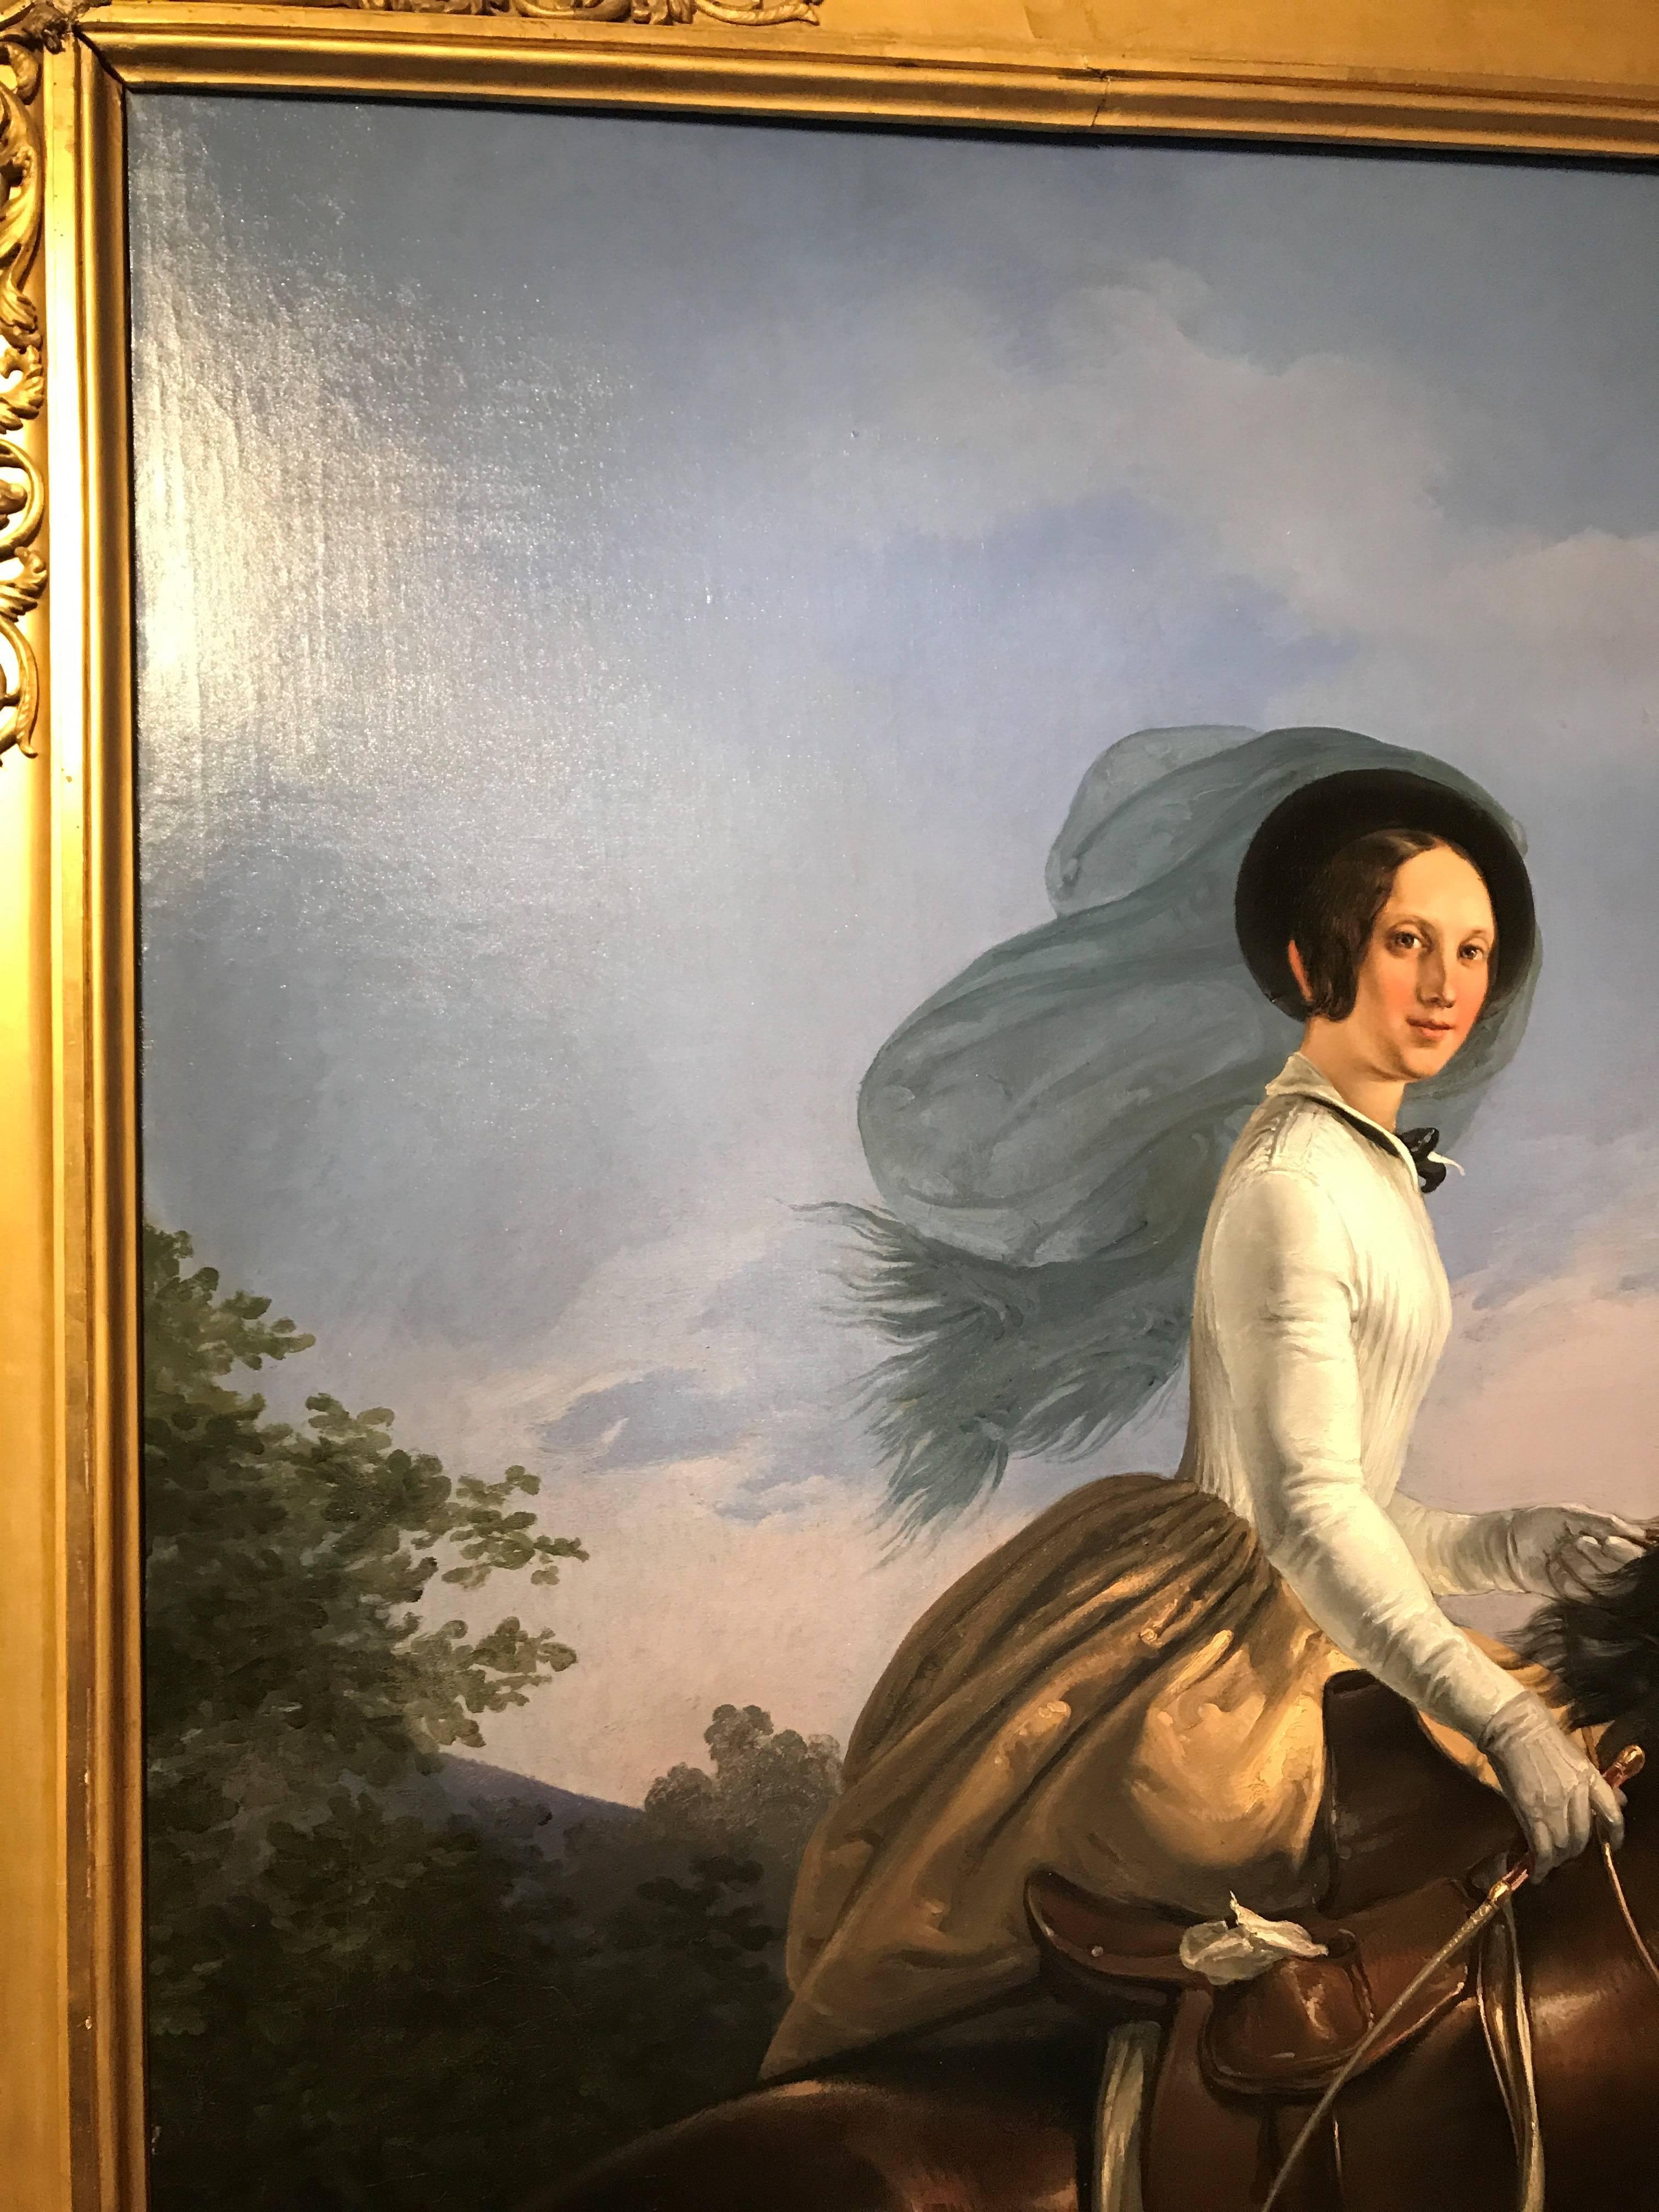 Portrait of Princess de Joinville riding a Bay Horse
Henri d’Aincy, Le Comte Monpezat (French 1817-1859)
Painted circa 1837-9
oil on canvas
113 x 92 inches (including frame)
92 x 70 inches (unframed)

Provenance – from a private royal